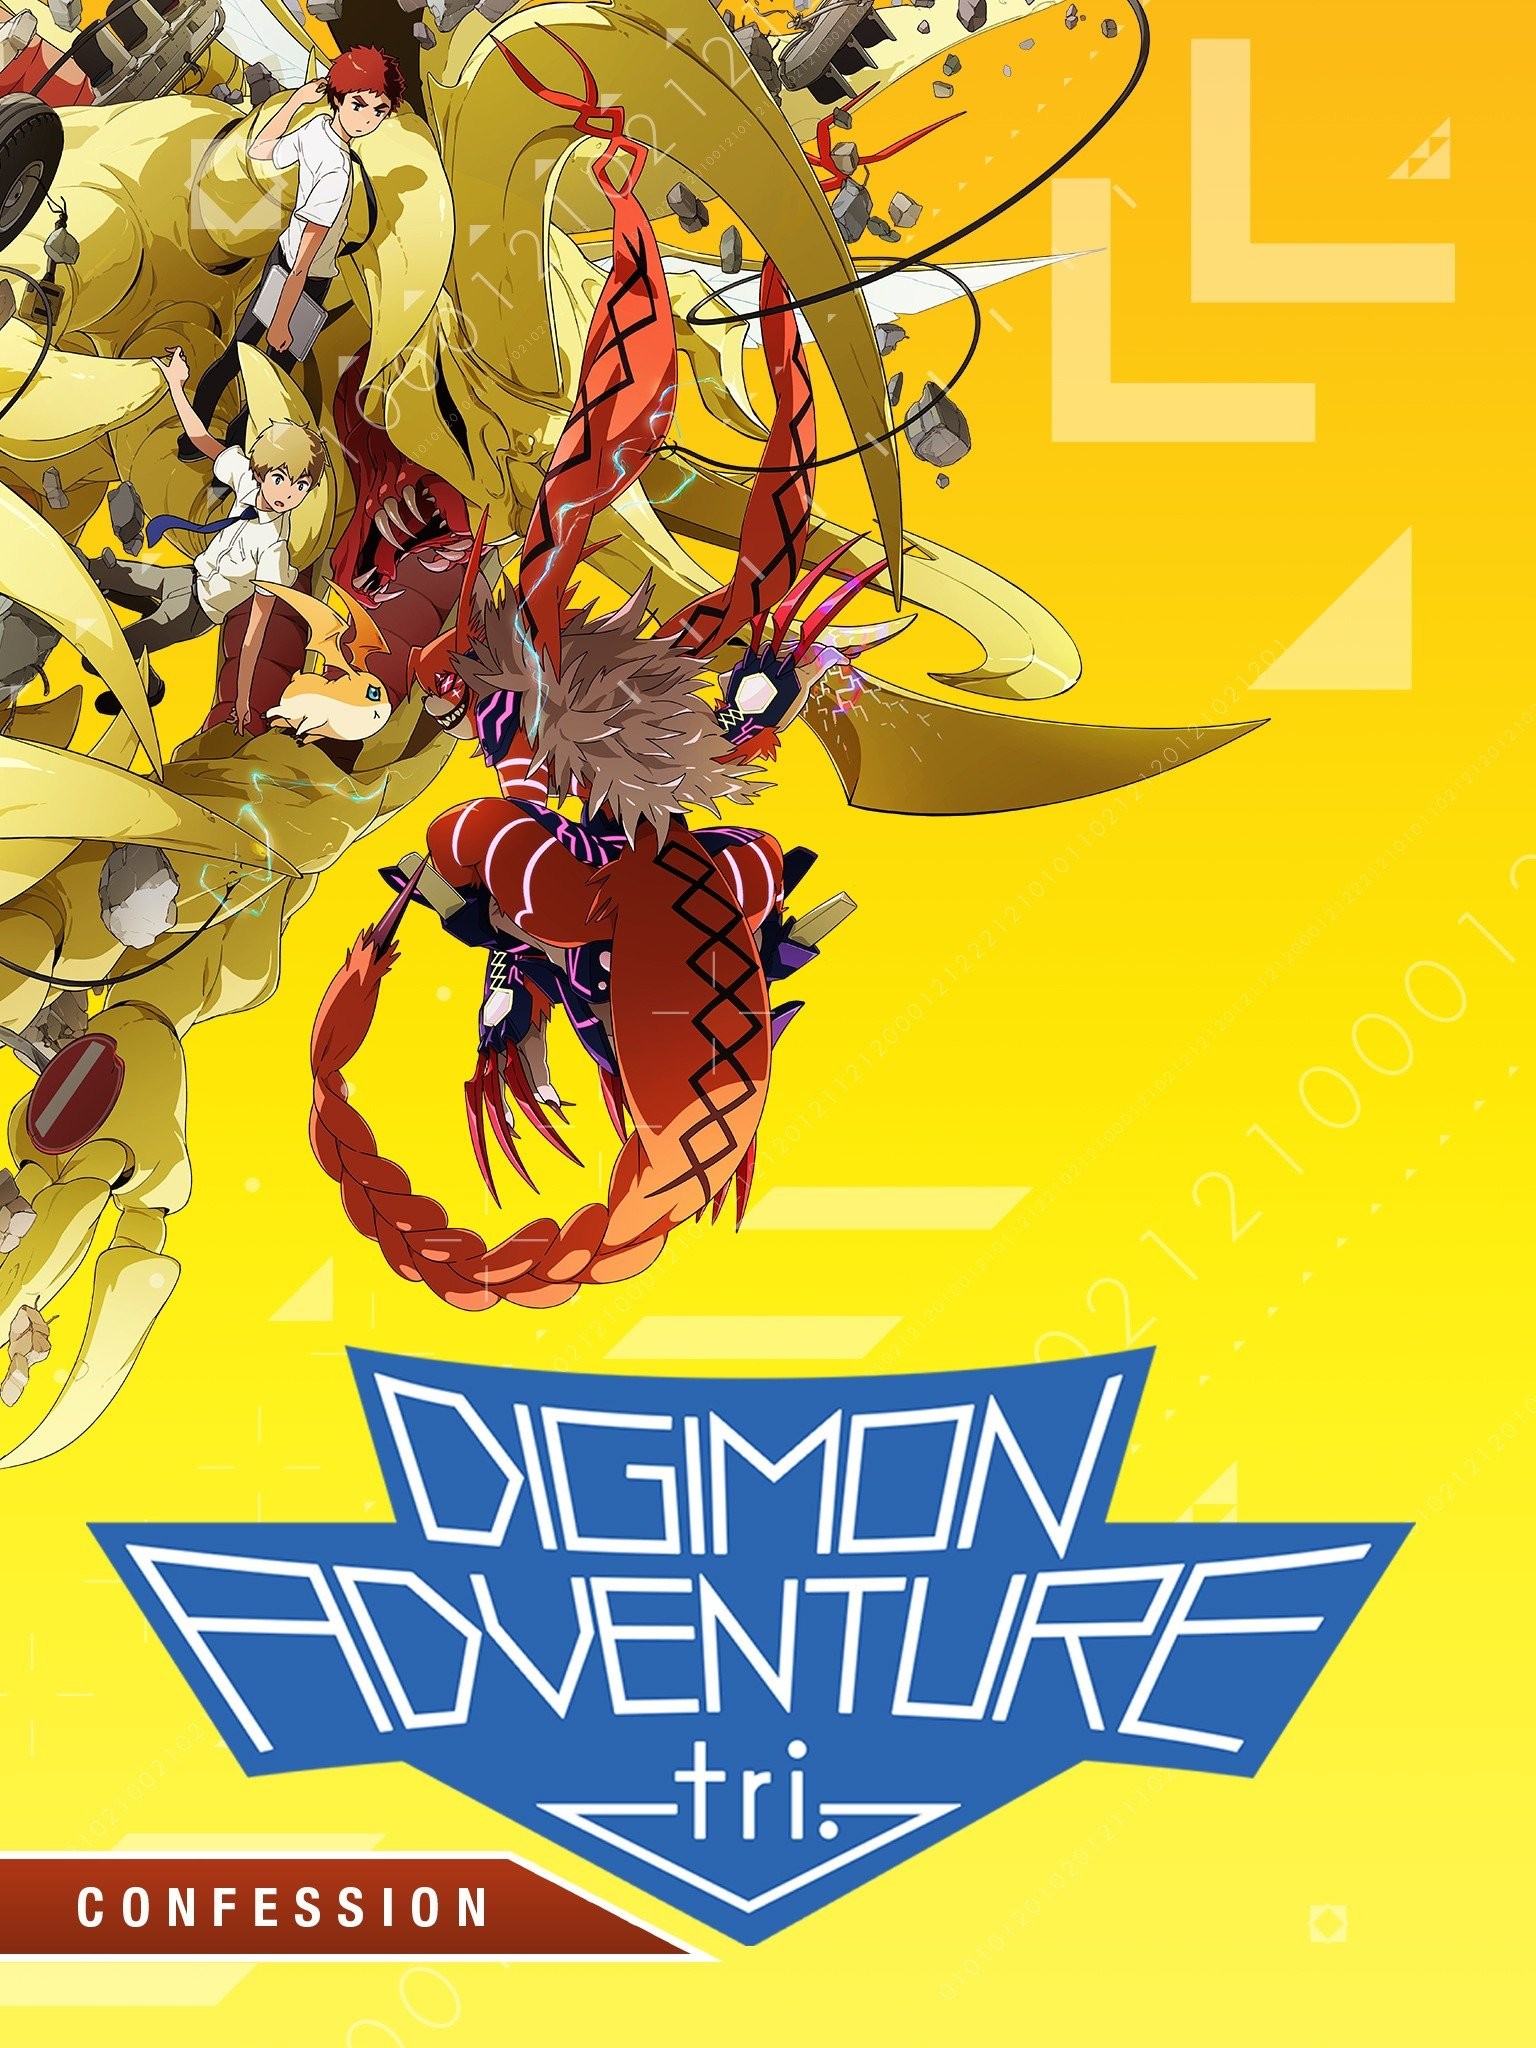 Digimon Adventure Tri. Fifth Film Synopsis Released